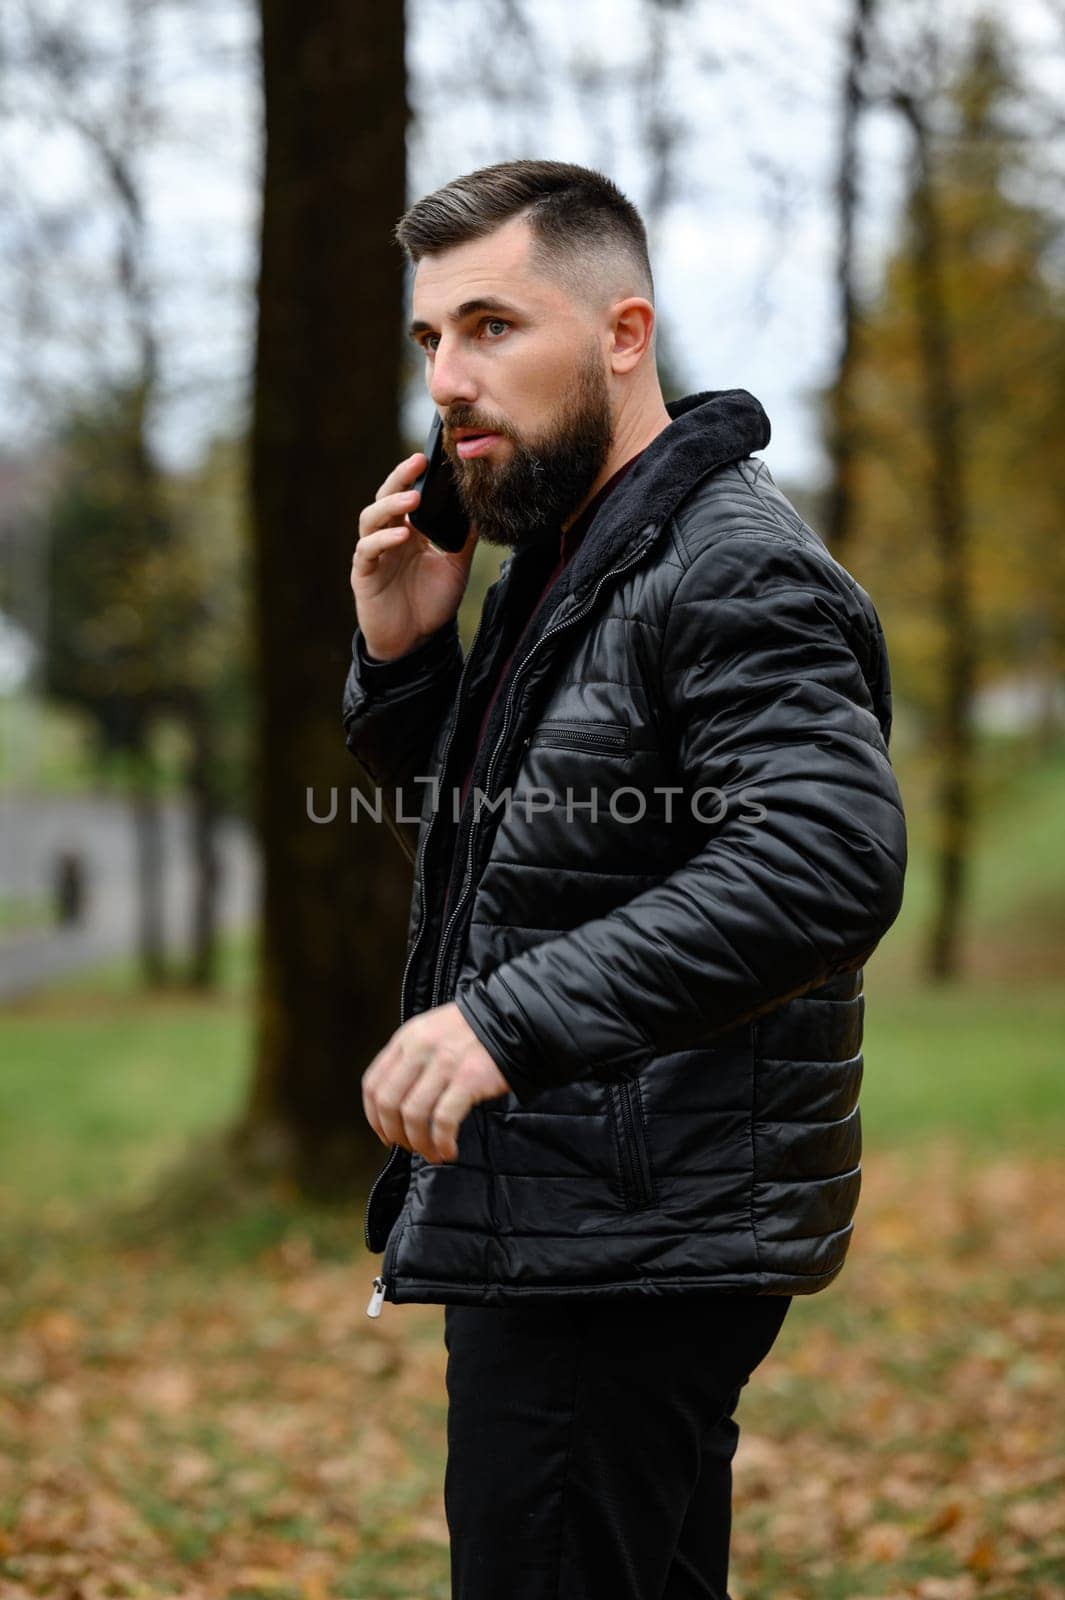 A man of elegant appearance is talking on the phone in the park, portrait of a man with a phone.